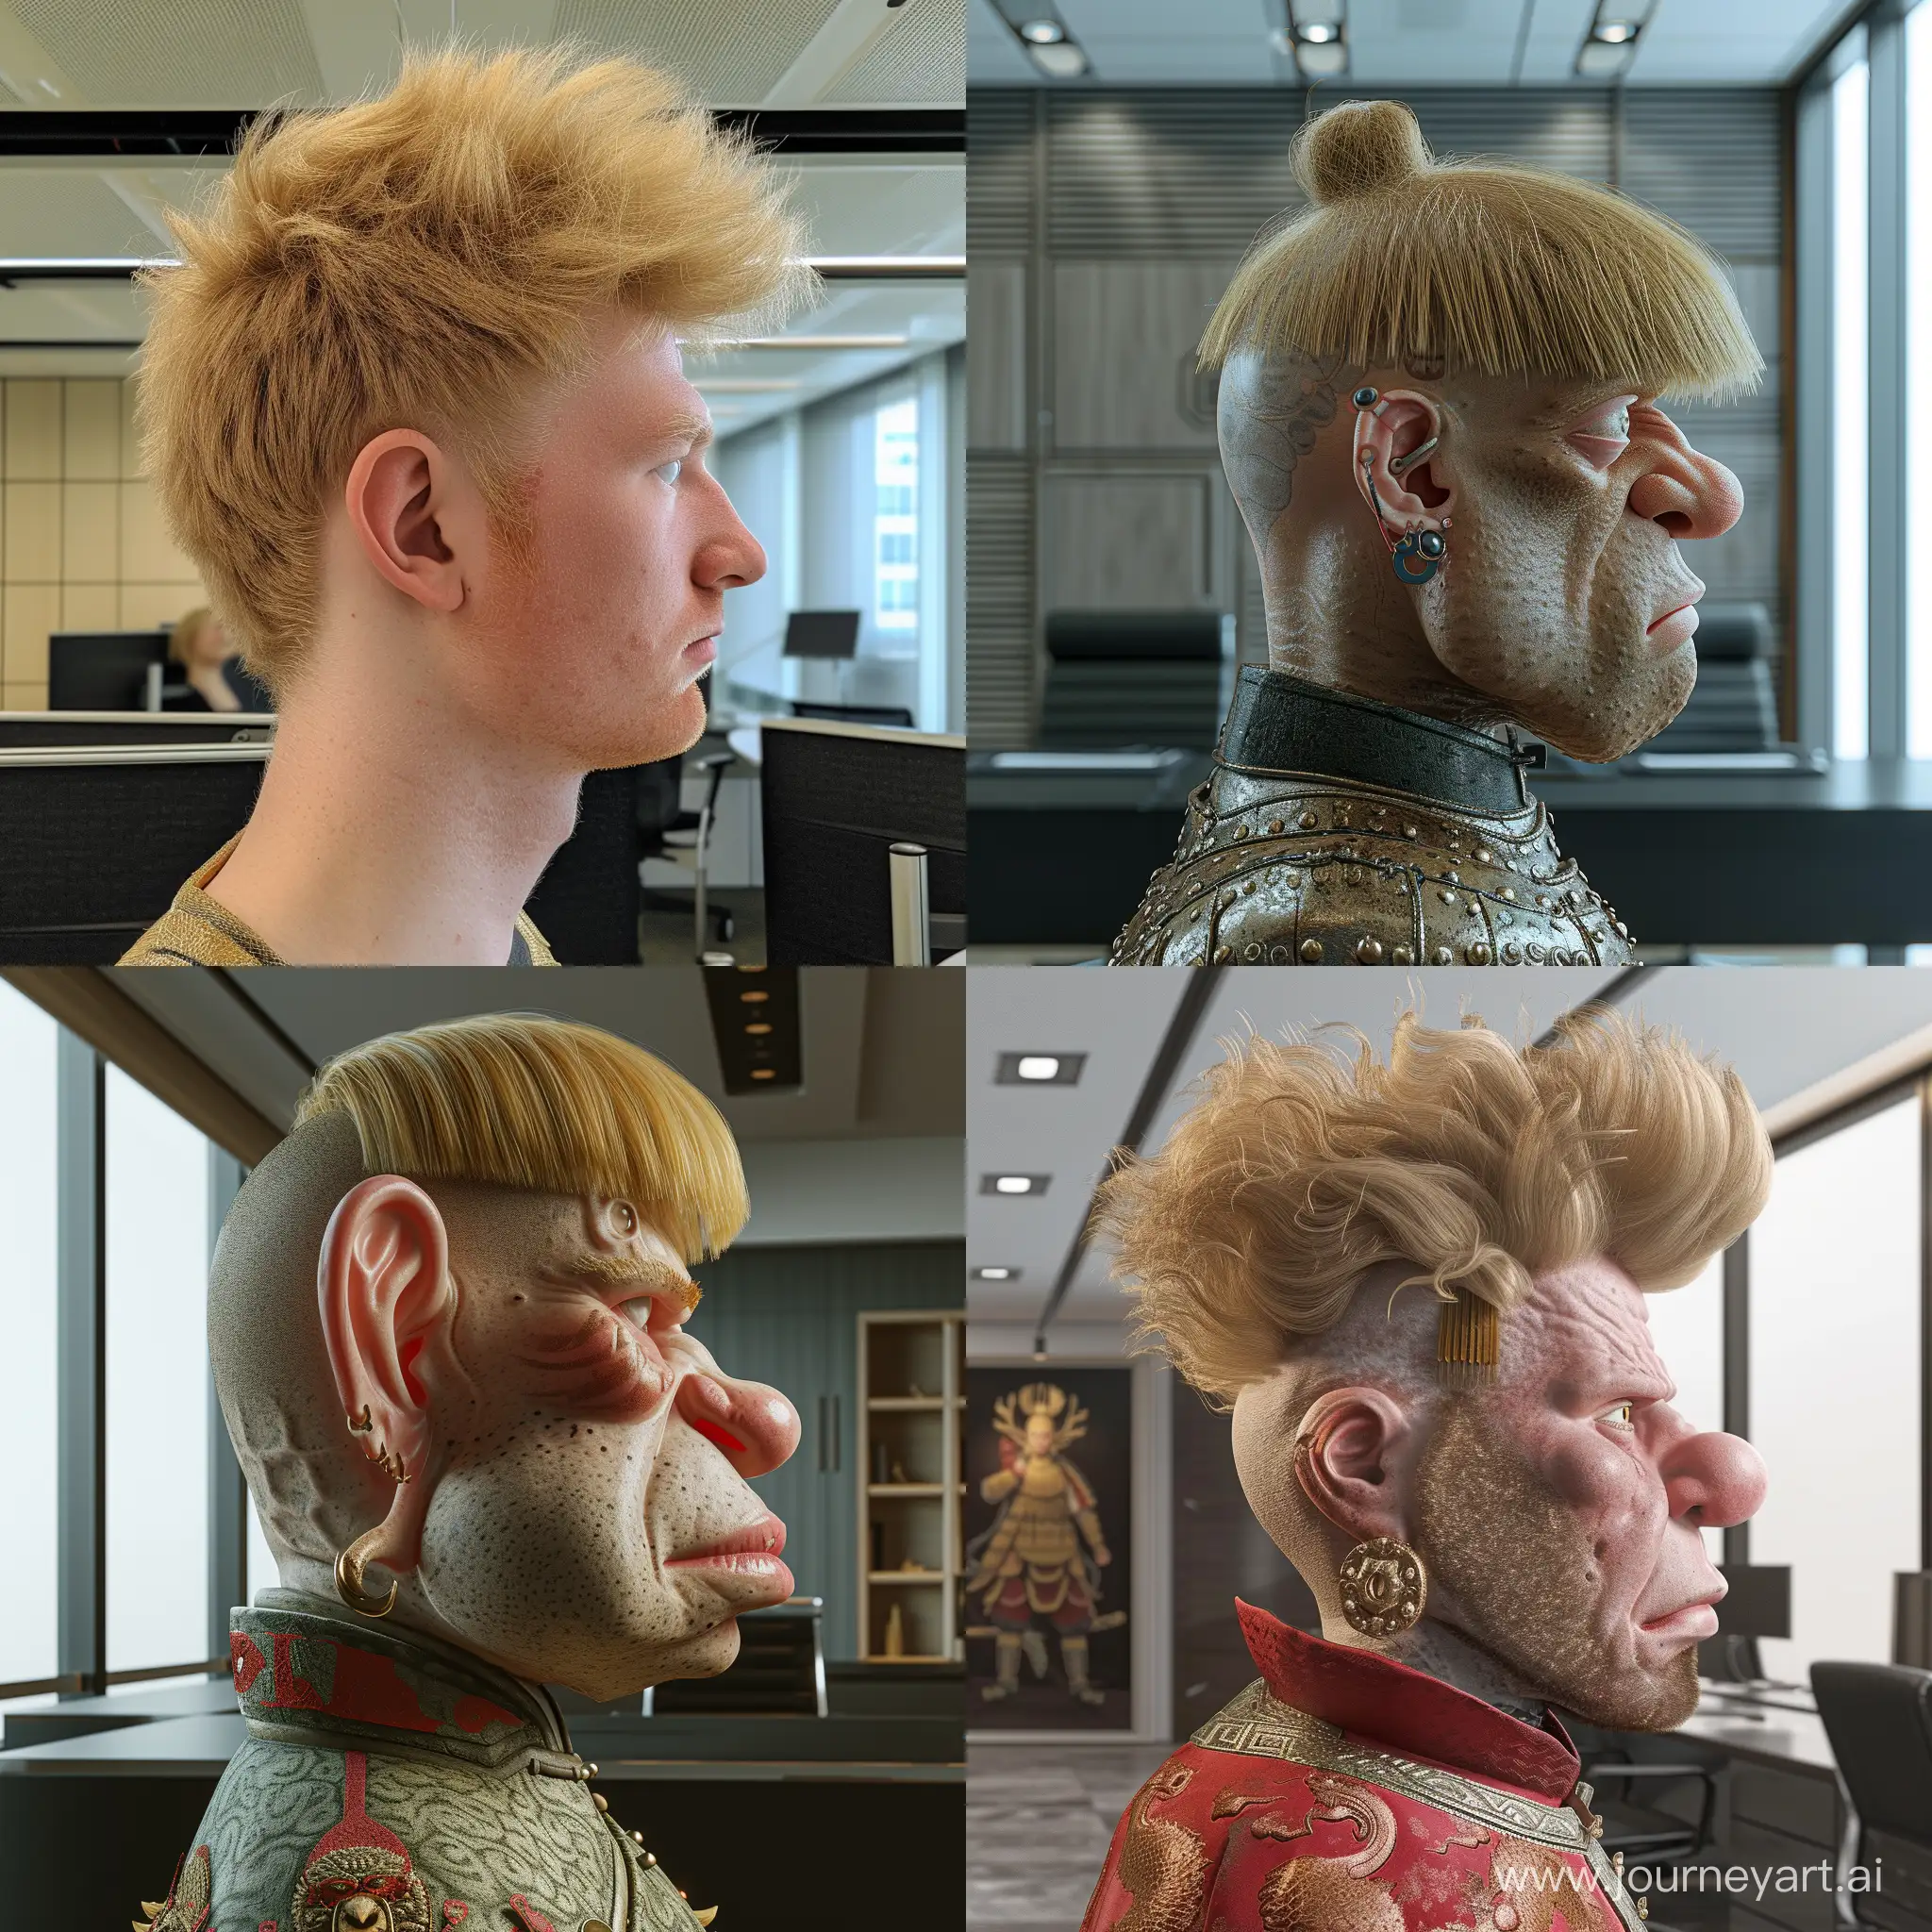 Quirky-Office-Encounter-Geeky-Blonde-Fringe-Meets-Medieval-Chinese-Warrior